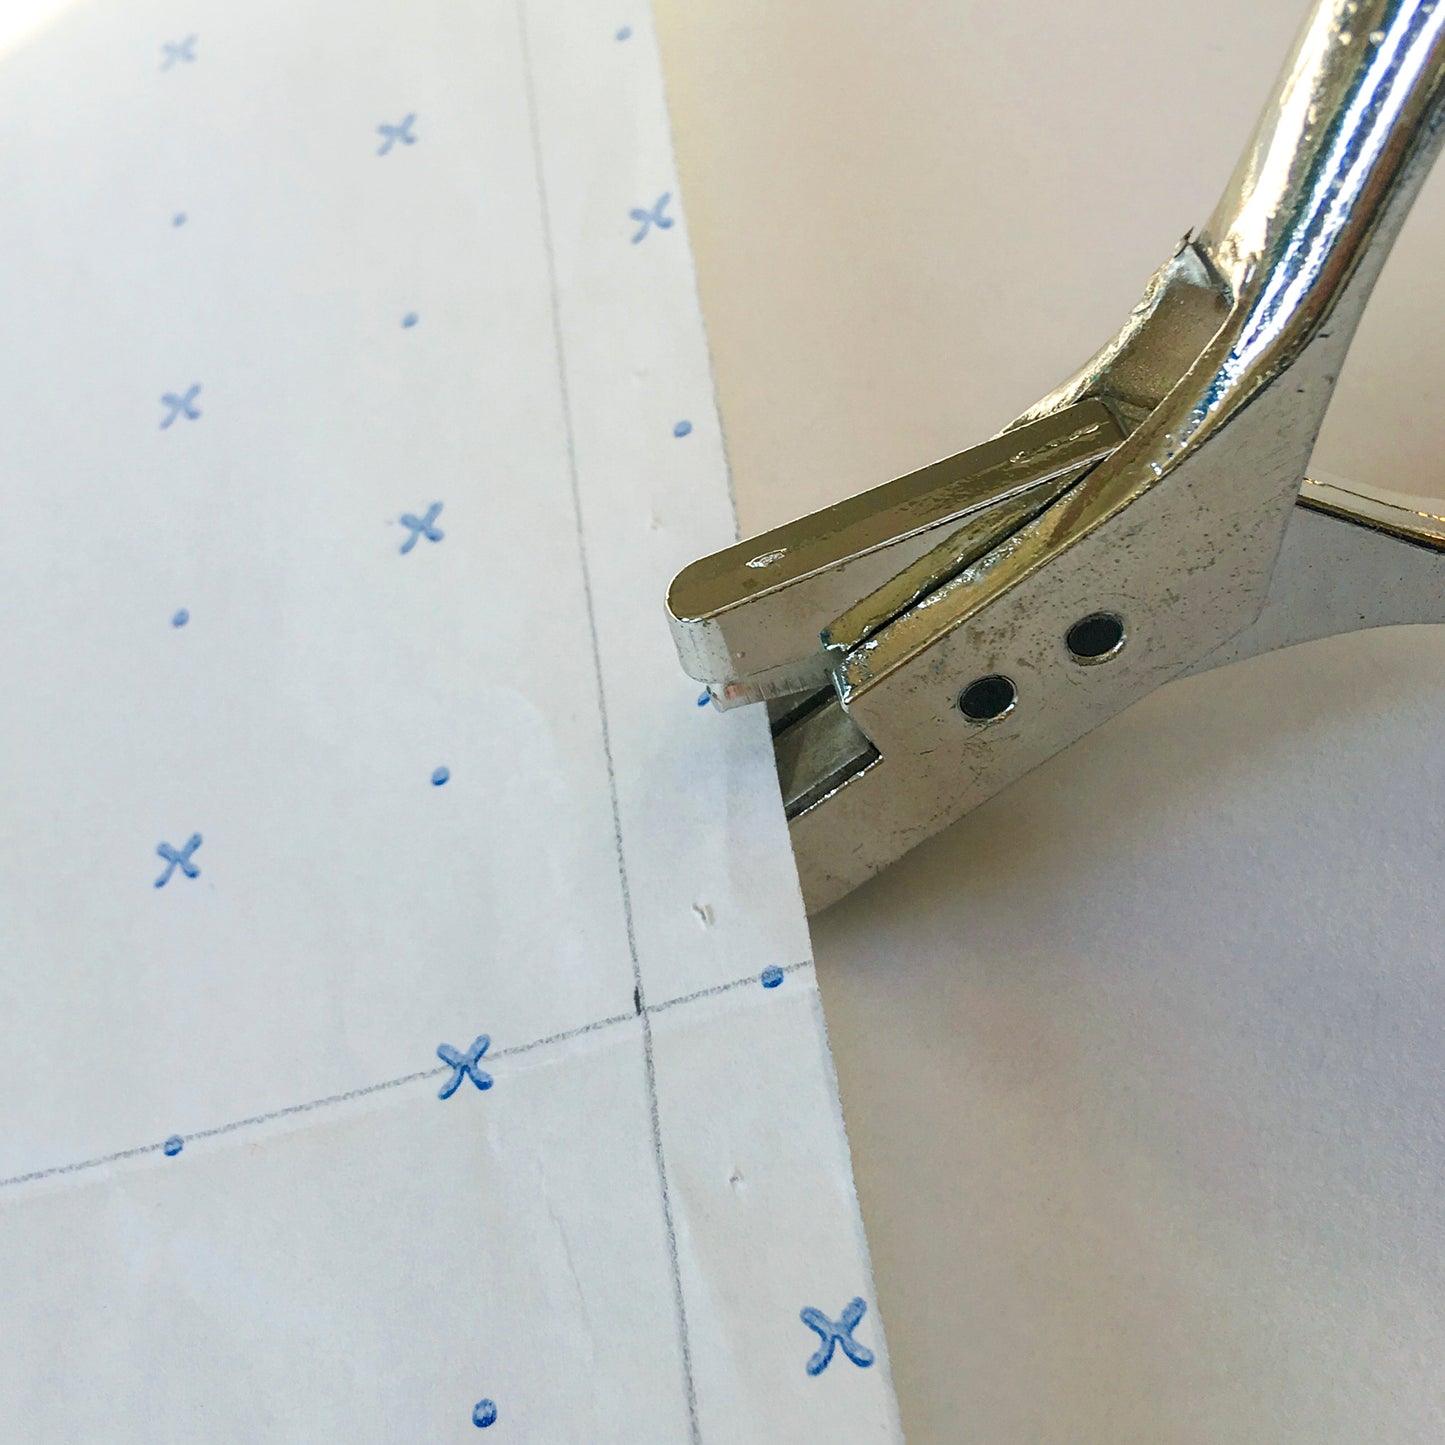 Use on card or paper to make notches in paper patterns to match pieces accurately during construction.The professional way to accurately mark notches on your pattern Makes a lovely tidy notch 6mm x 1.5mm (1/4″ x 1/16″). Can be used to mark darts, pleats, seam allowances, balance notches on your pattern with accuracy and ease.Ergonomically designed with a sprung handle for left or right-handed use. Use on card or paper